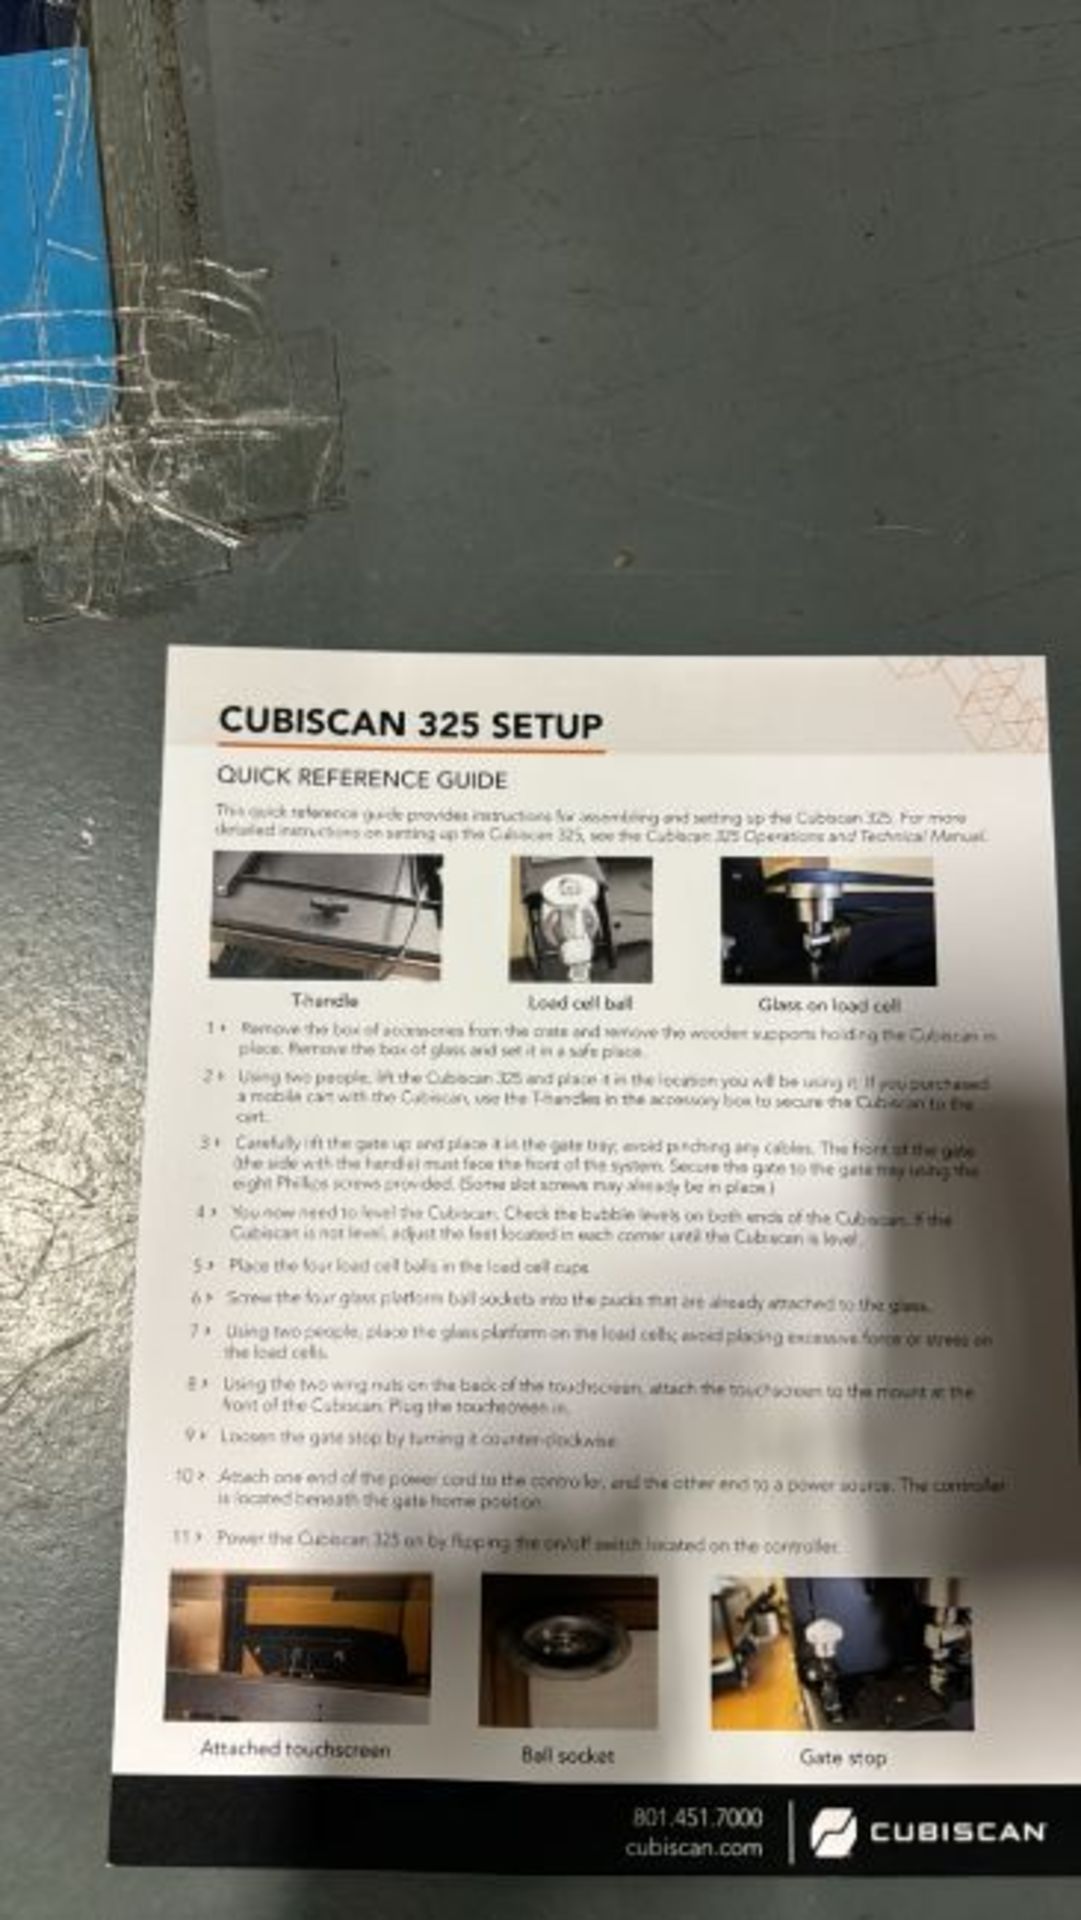 Cubiscan 325 - Excels at dimensioning apparel and non-rigid items - Image 12 of 13